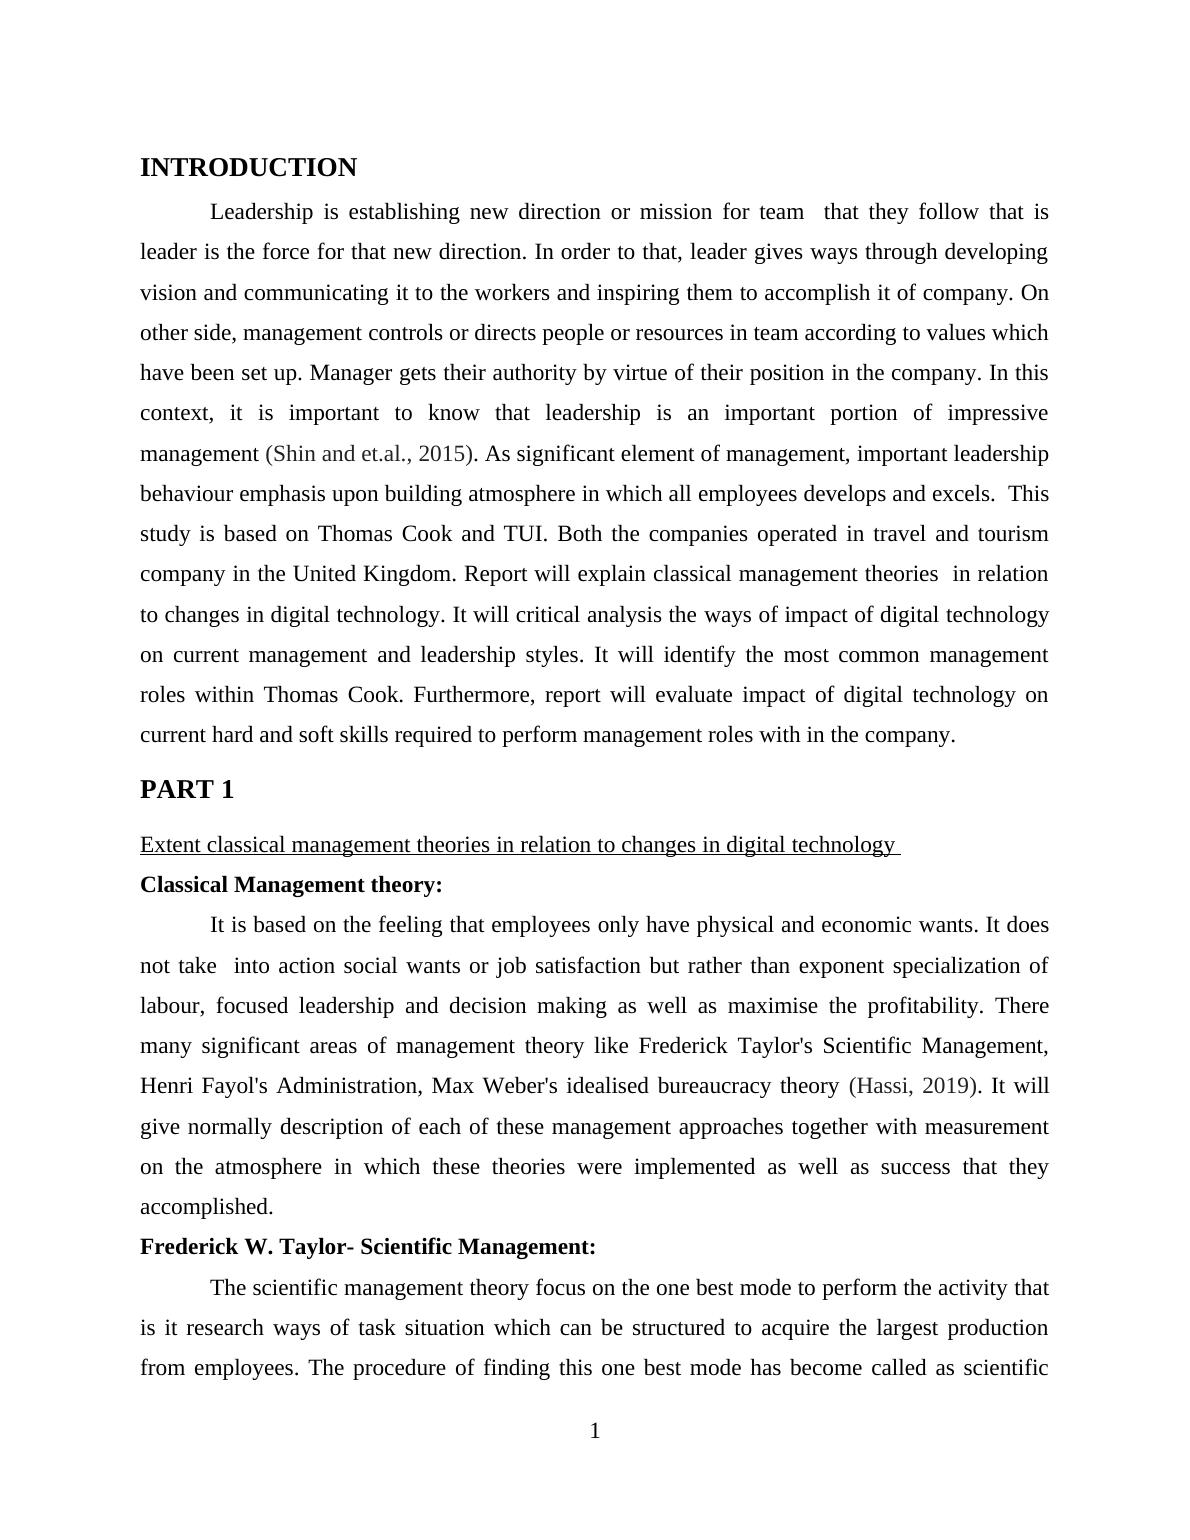 Leadership and Management for Service Industry Assignment (Doc)_4